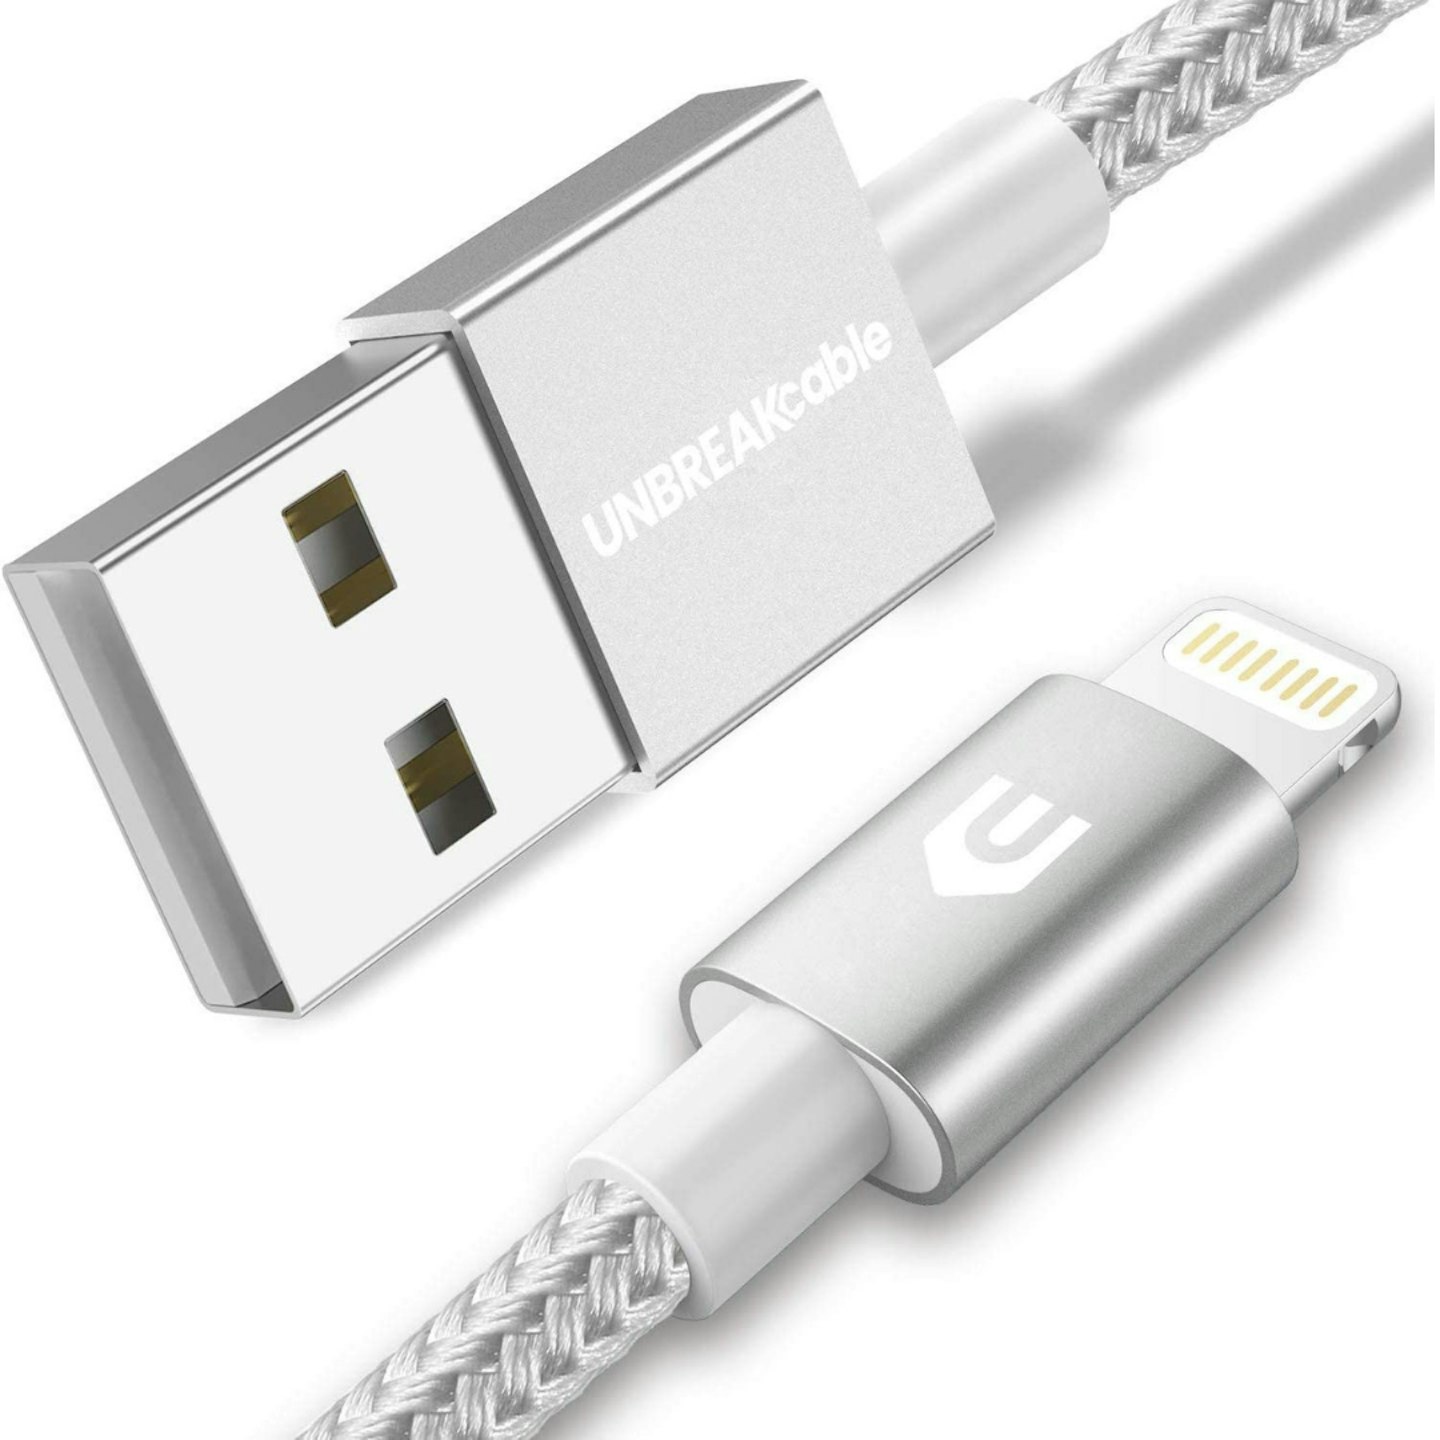 UNBREAKcable iPhone Charger Cable